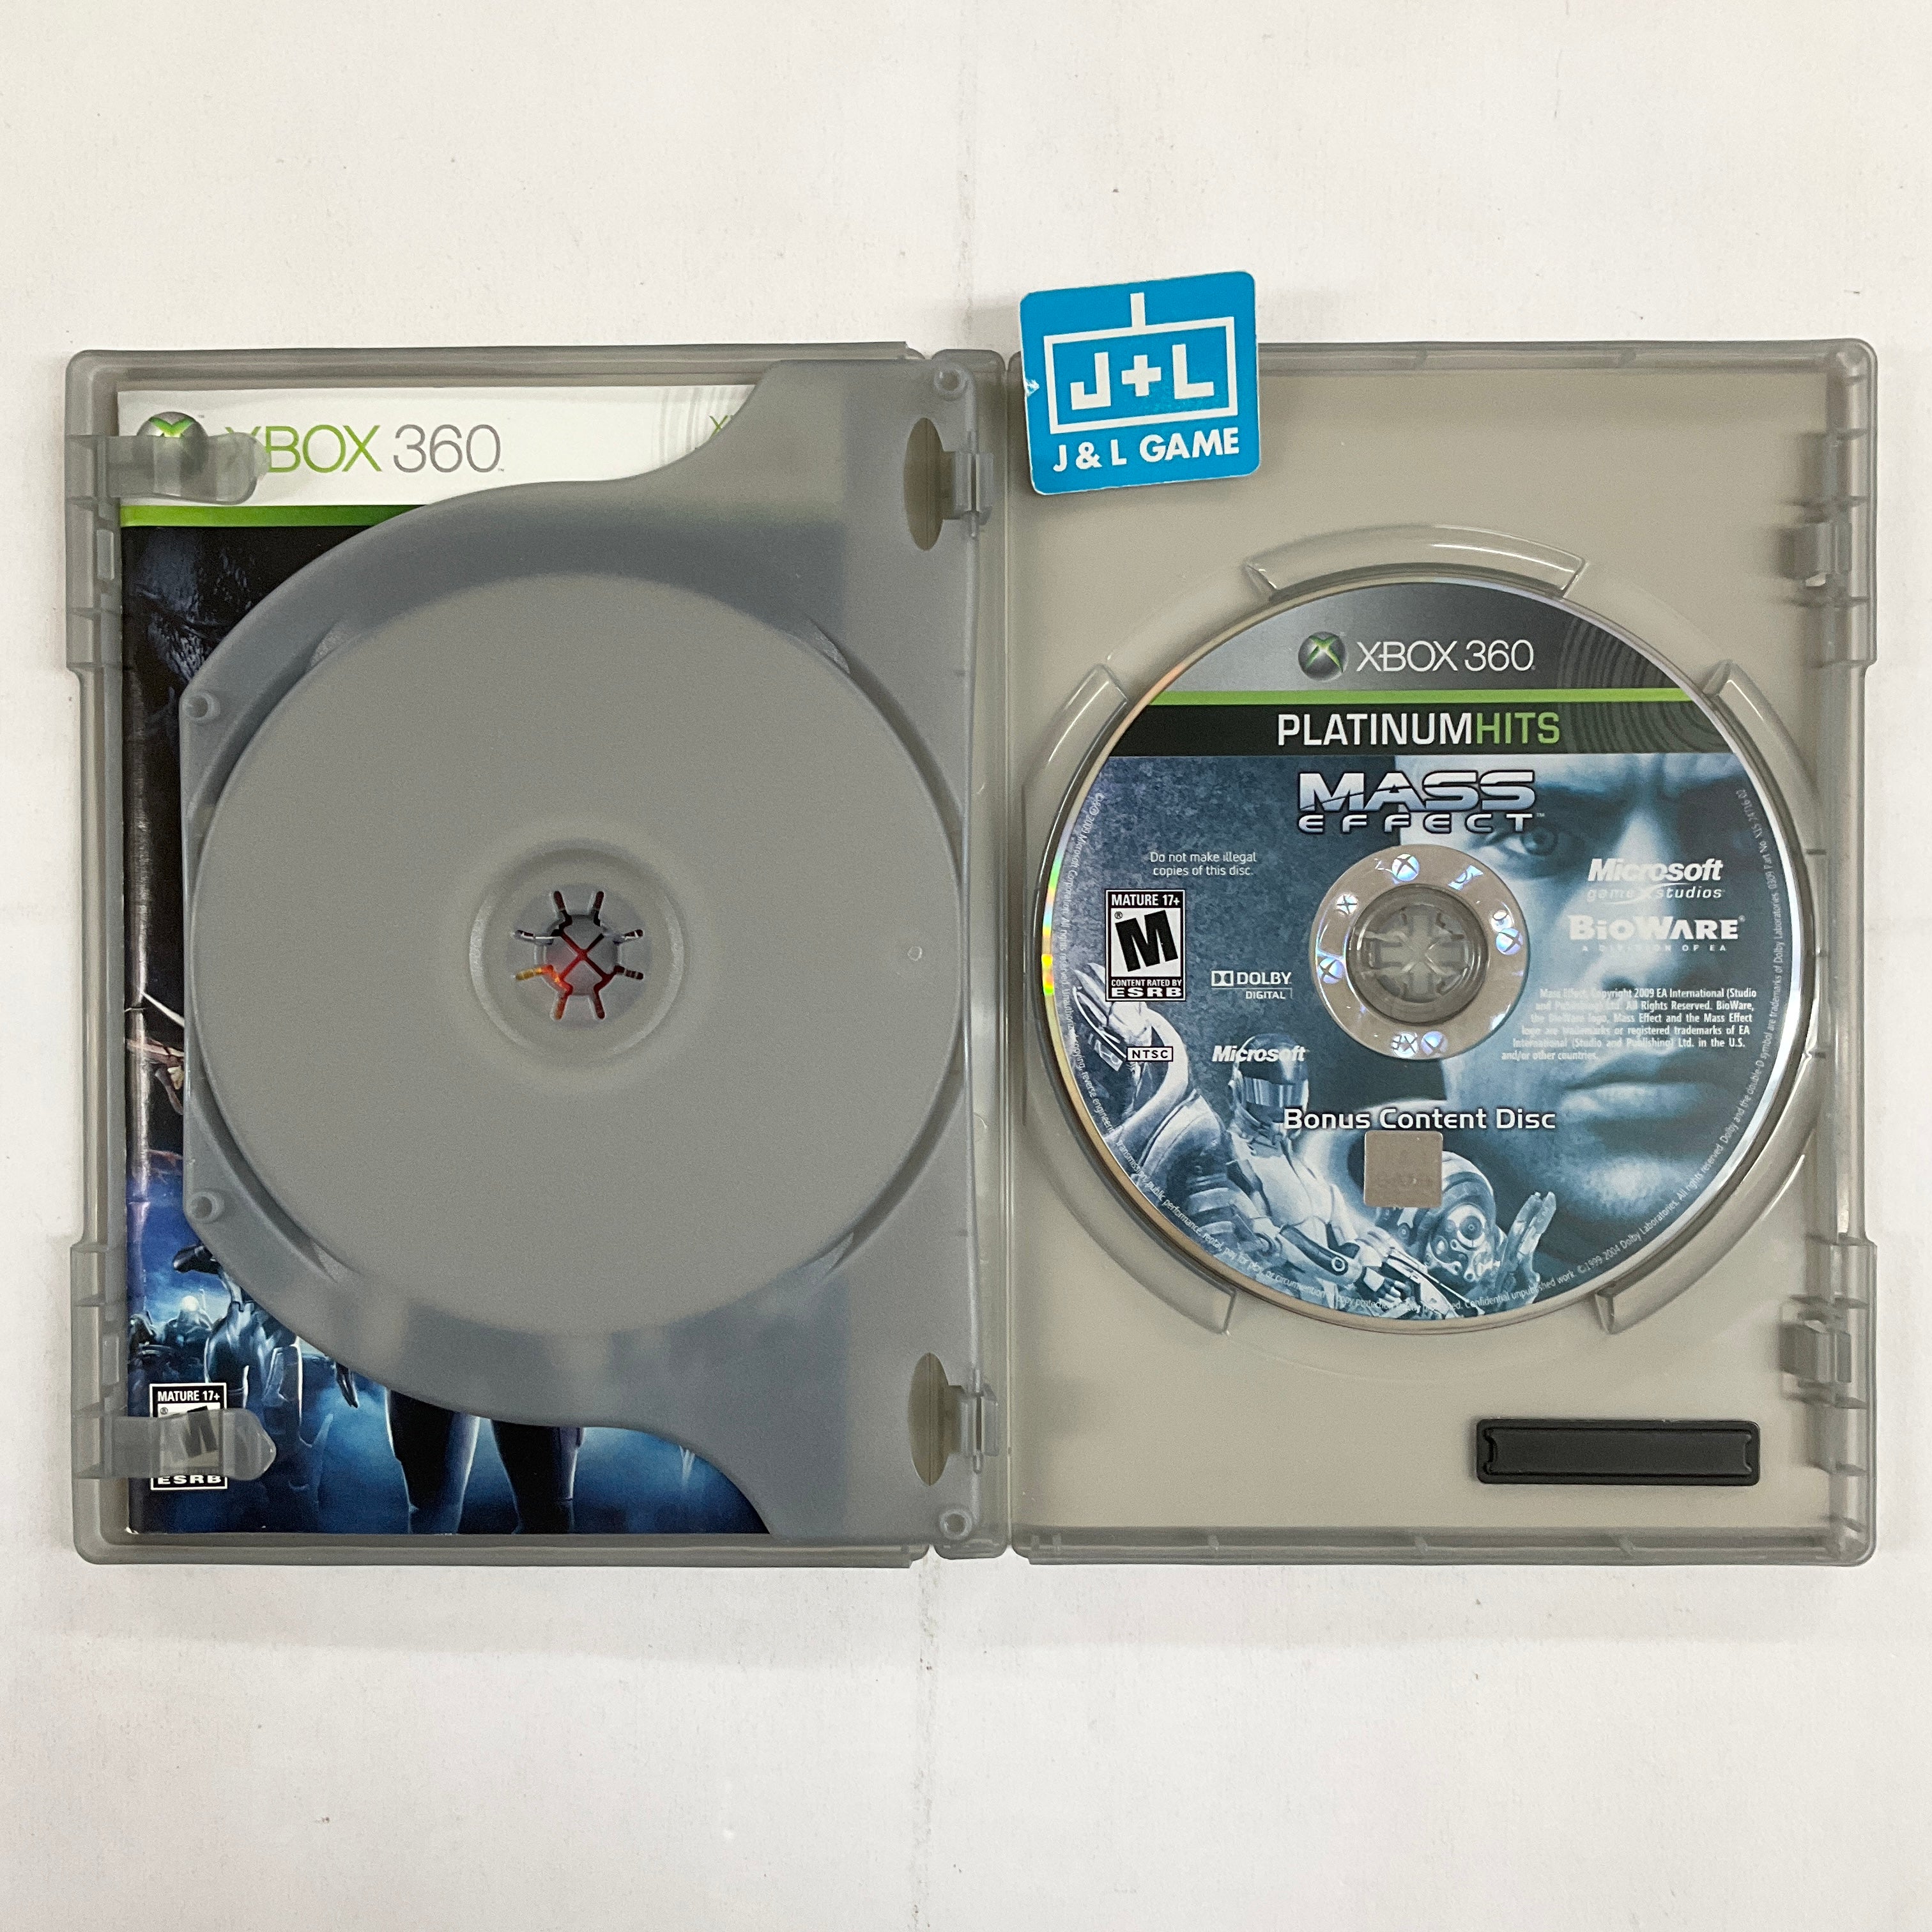 Mass Effect (Platinum Hits) - Xbox 360 [Pre-Owned] Video Games Microsoft Game Studios   